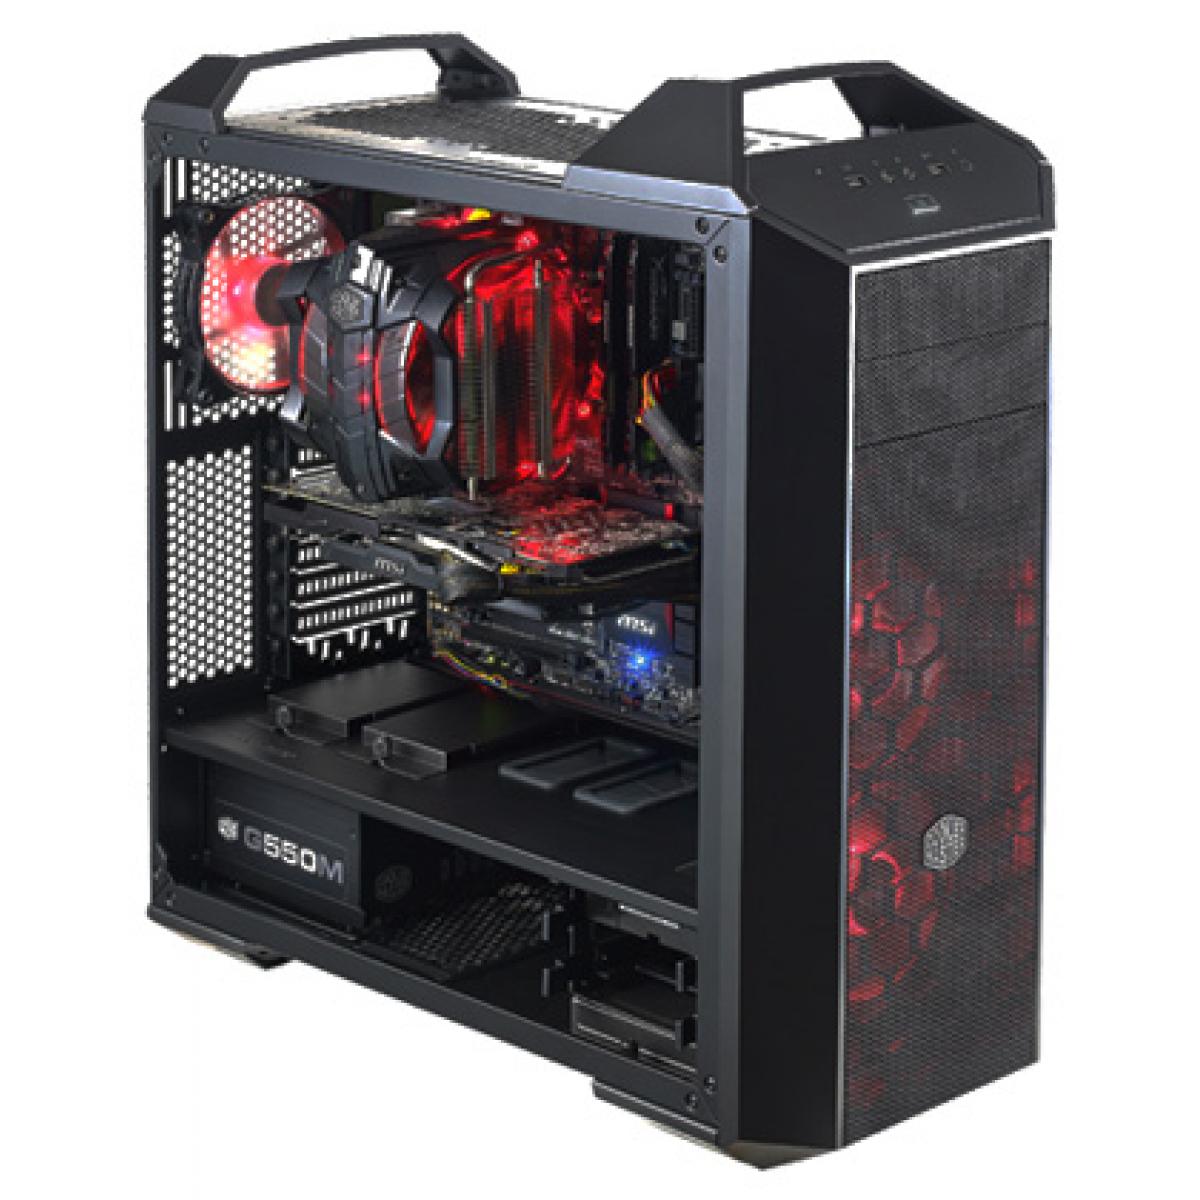 MasterCase 5 Mid-Tower Gaming Case | MCX-0005-KKN00 | City Center For ...